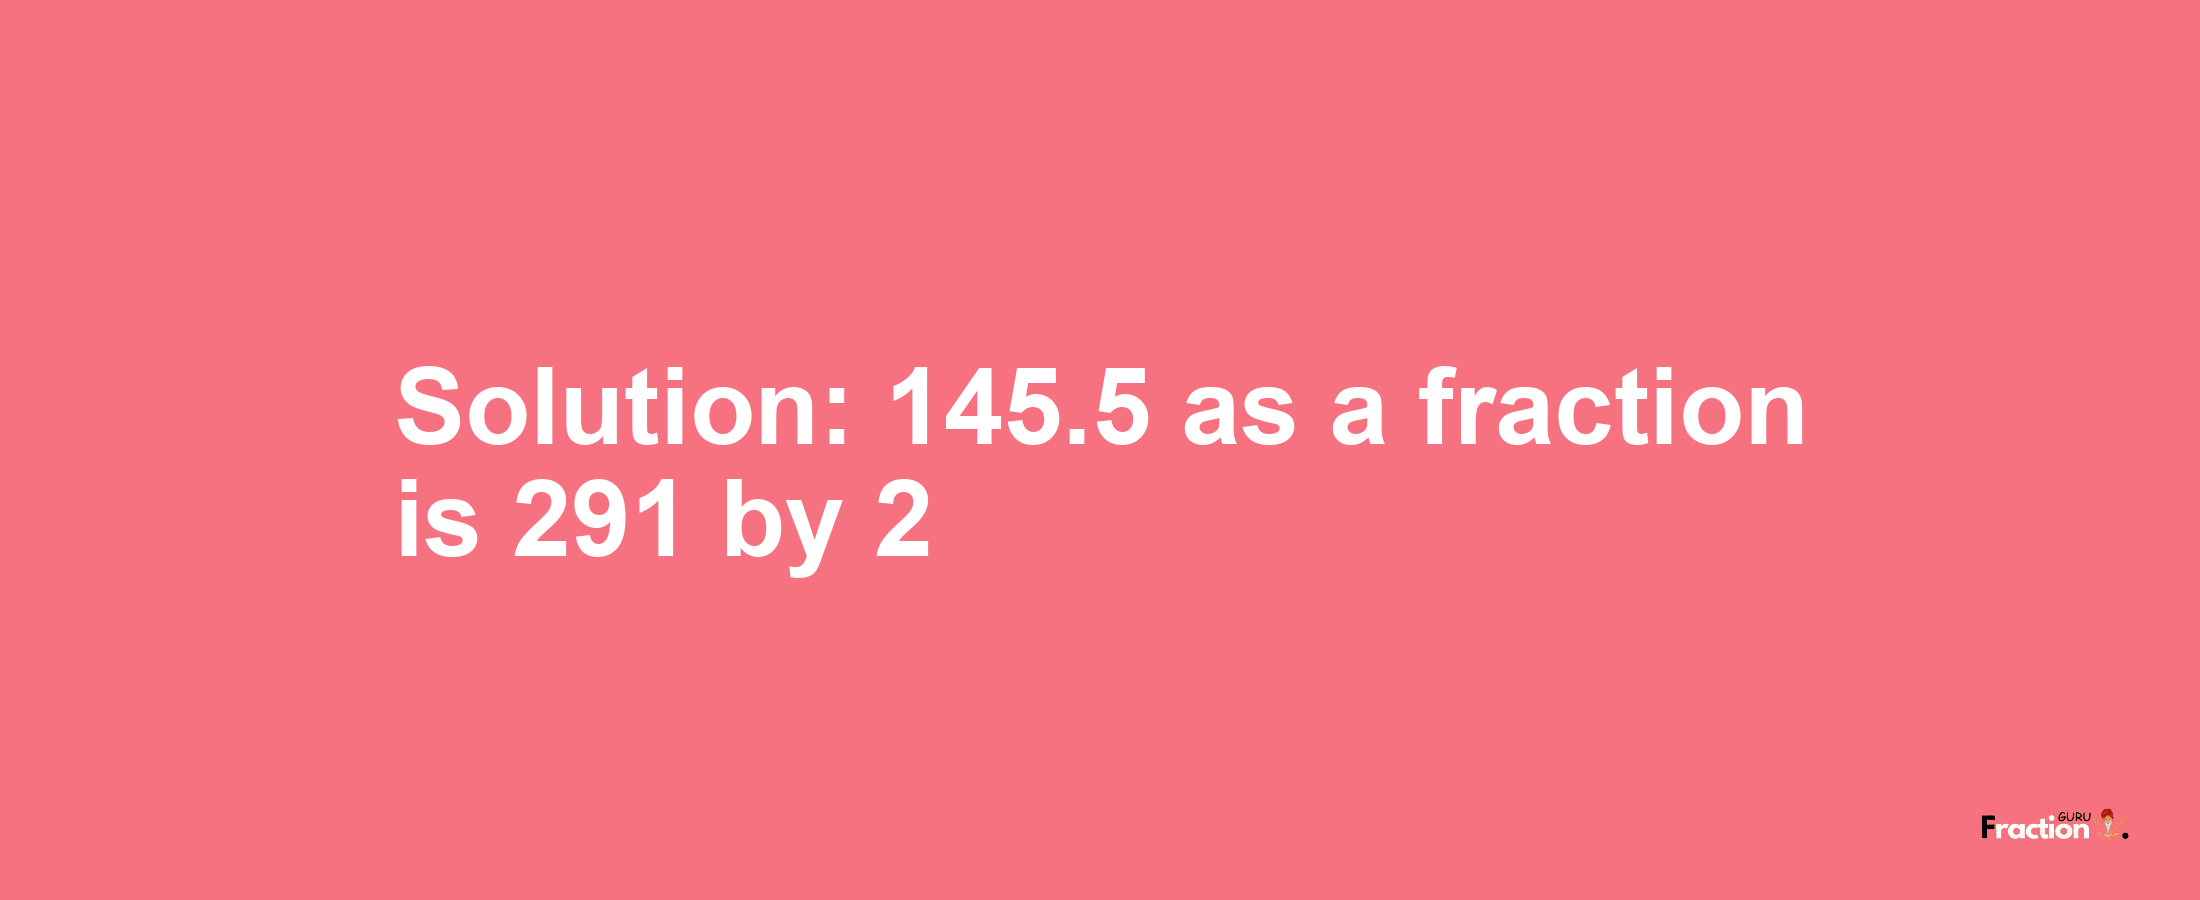 Solution:145.5 as a fraction is 291/2